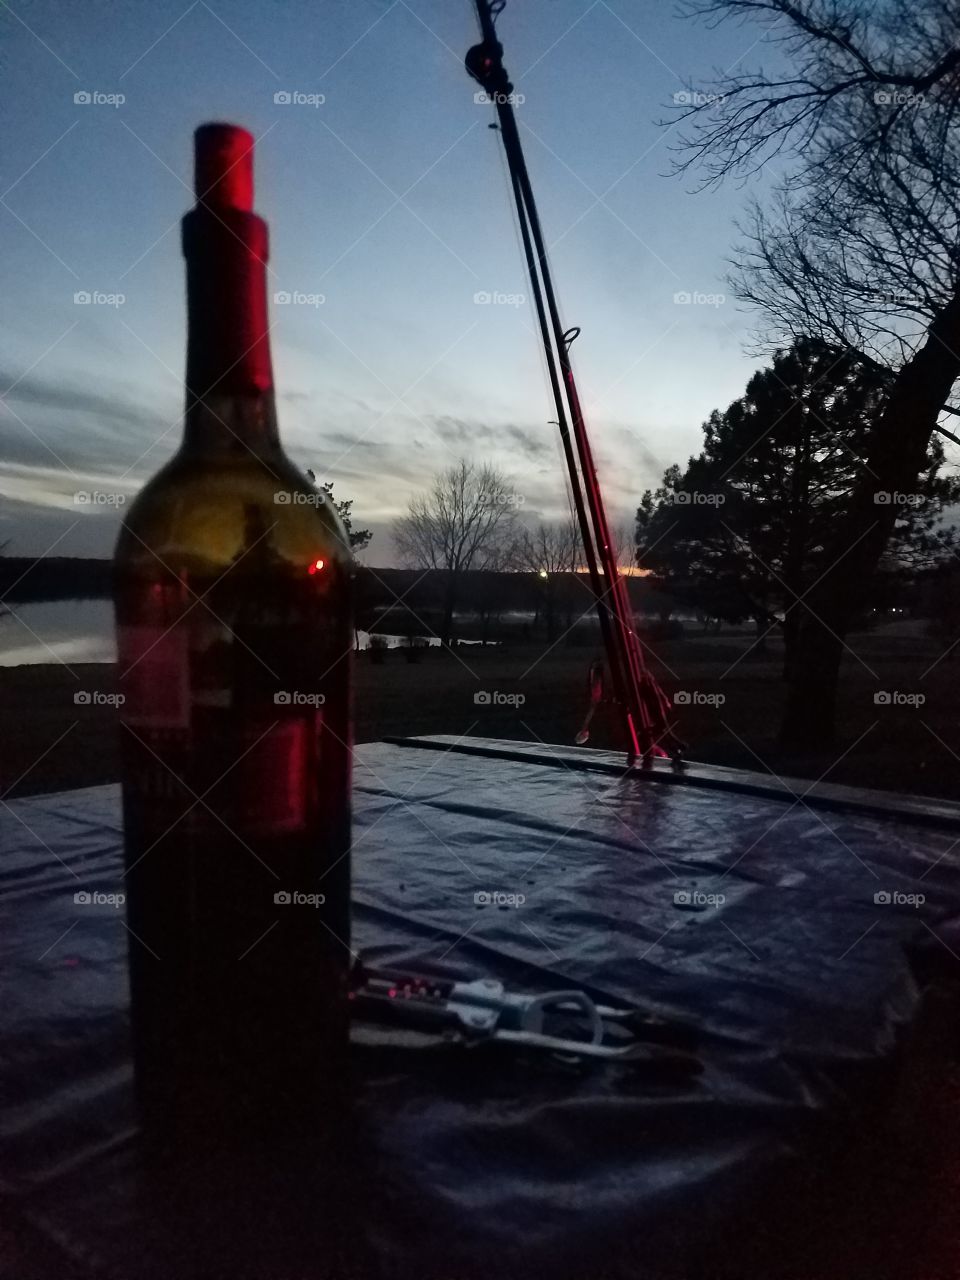 Camping, Fishing and Wine